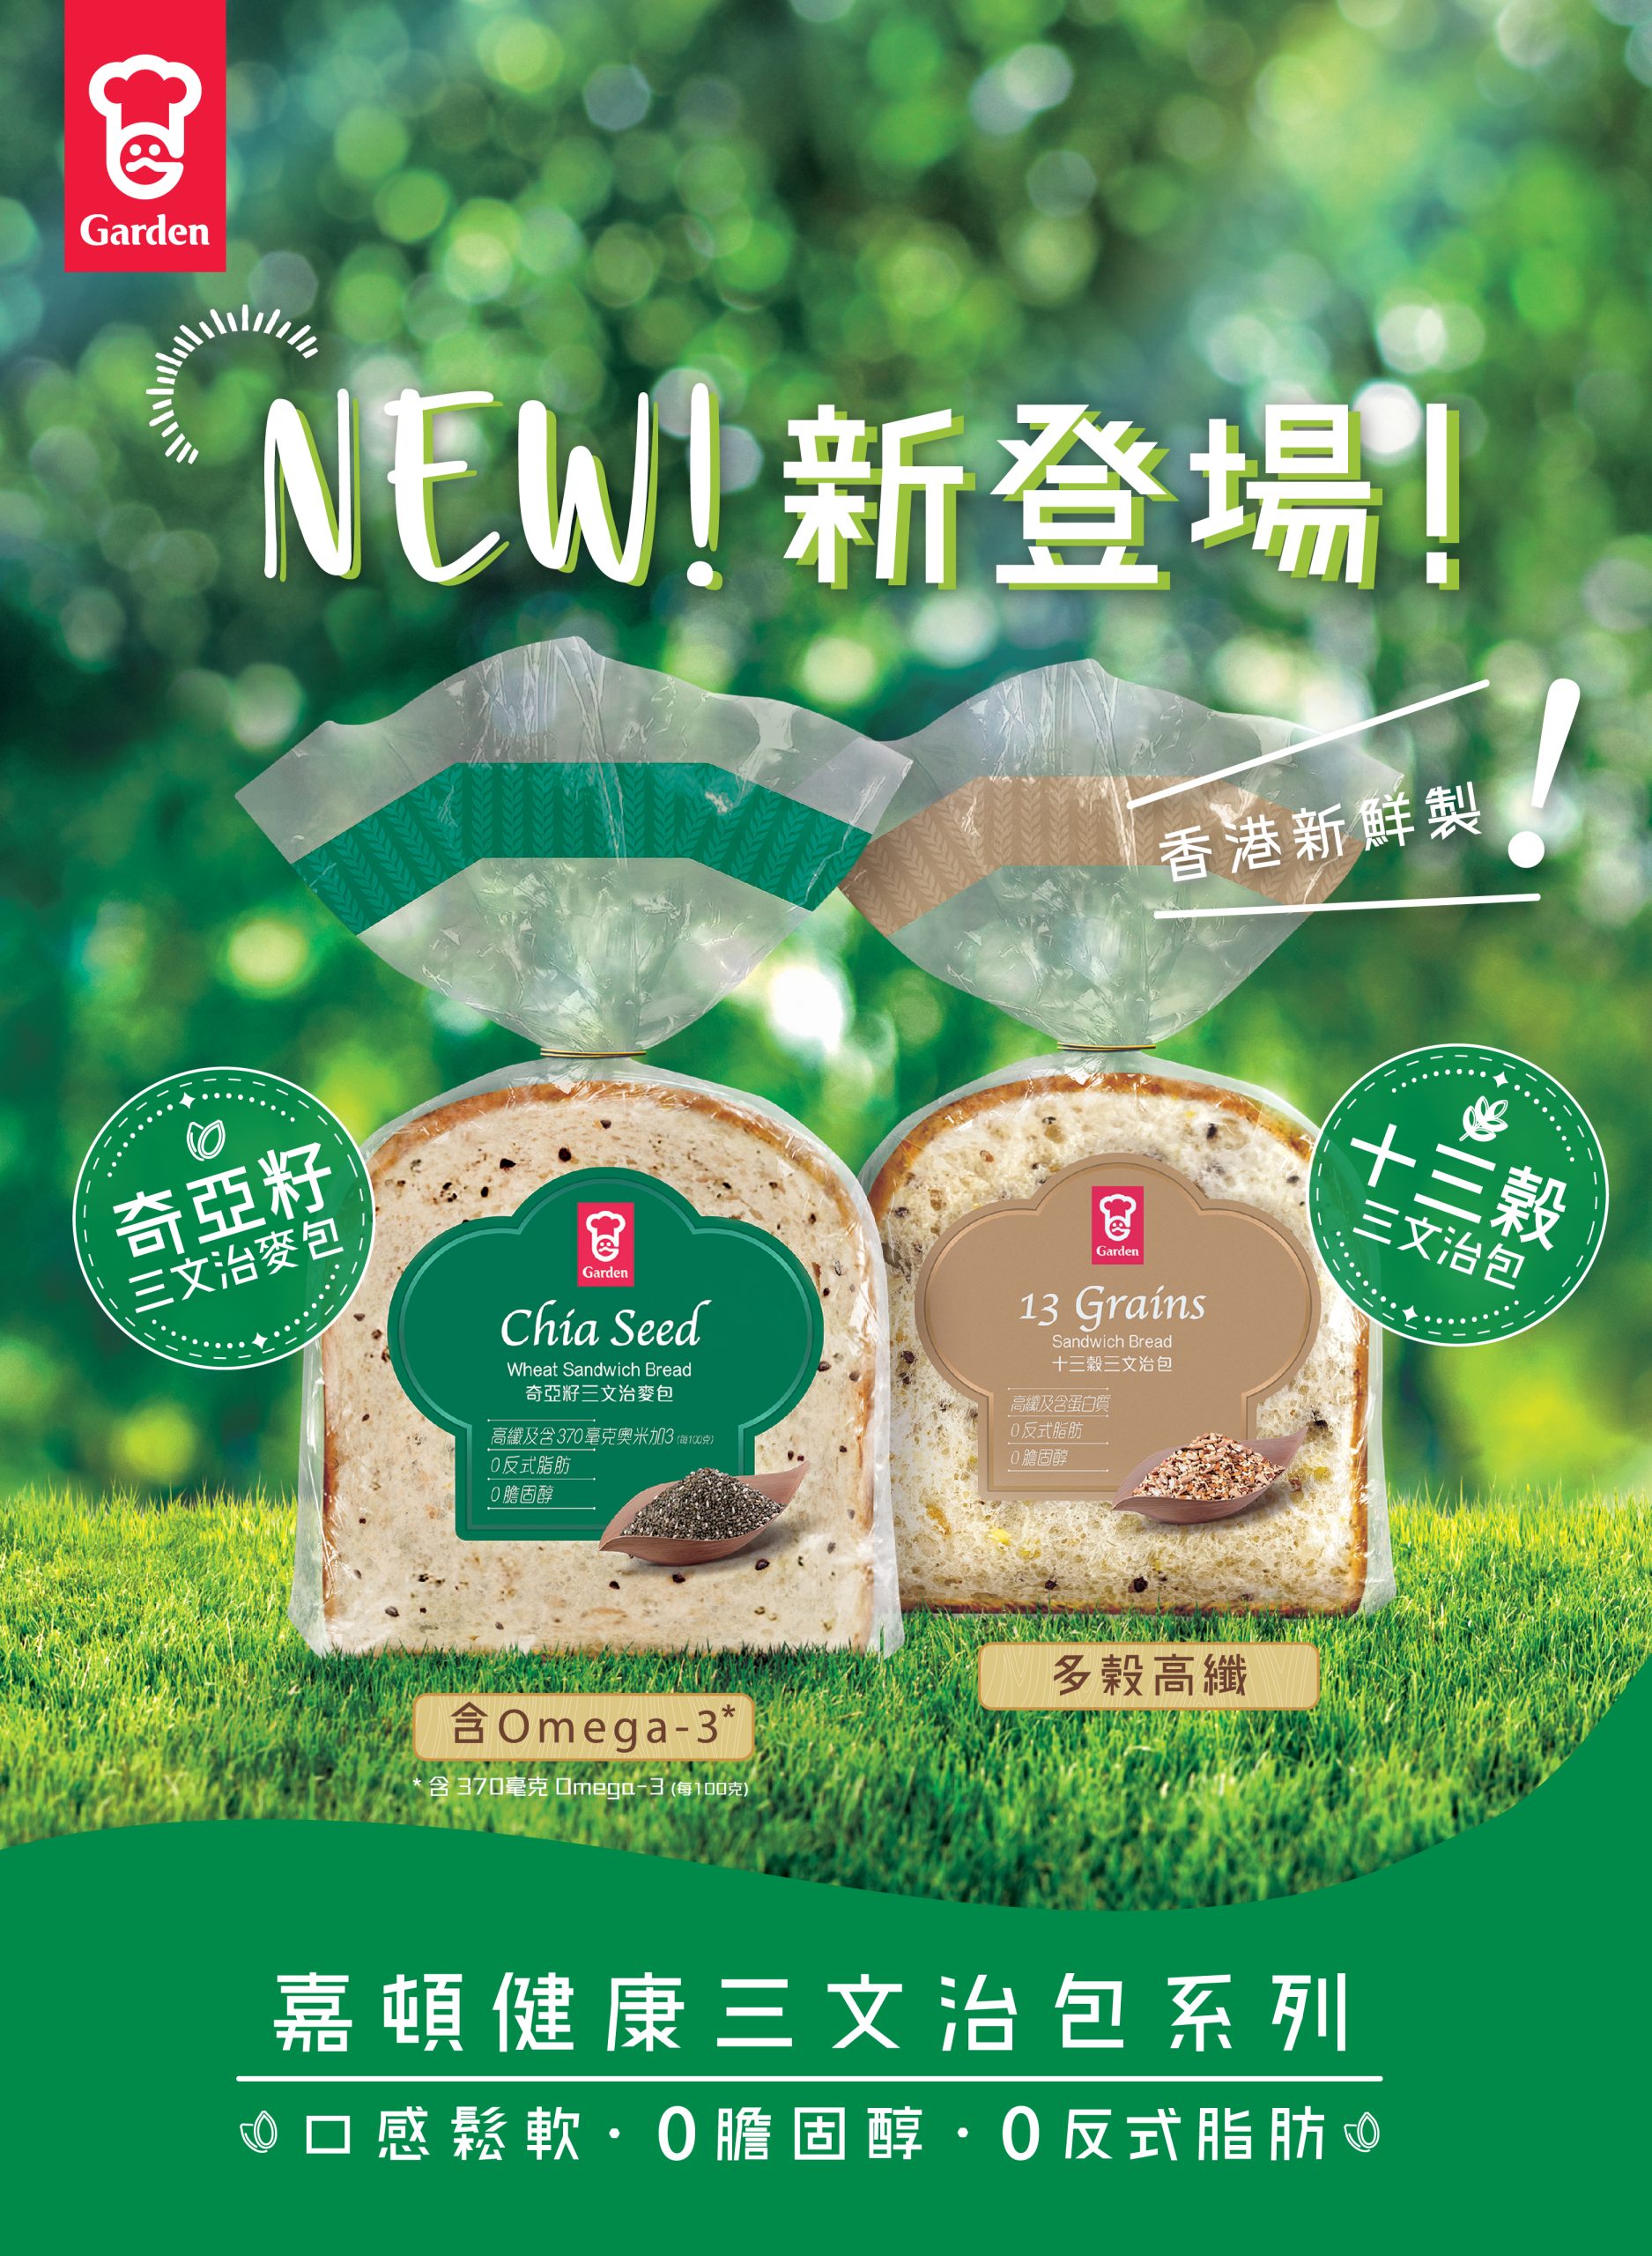 Garden Health Sandwich Bread Series Newly Launched